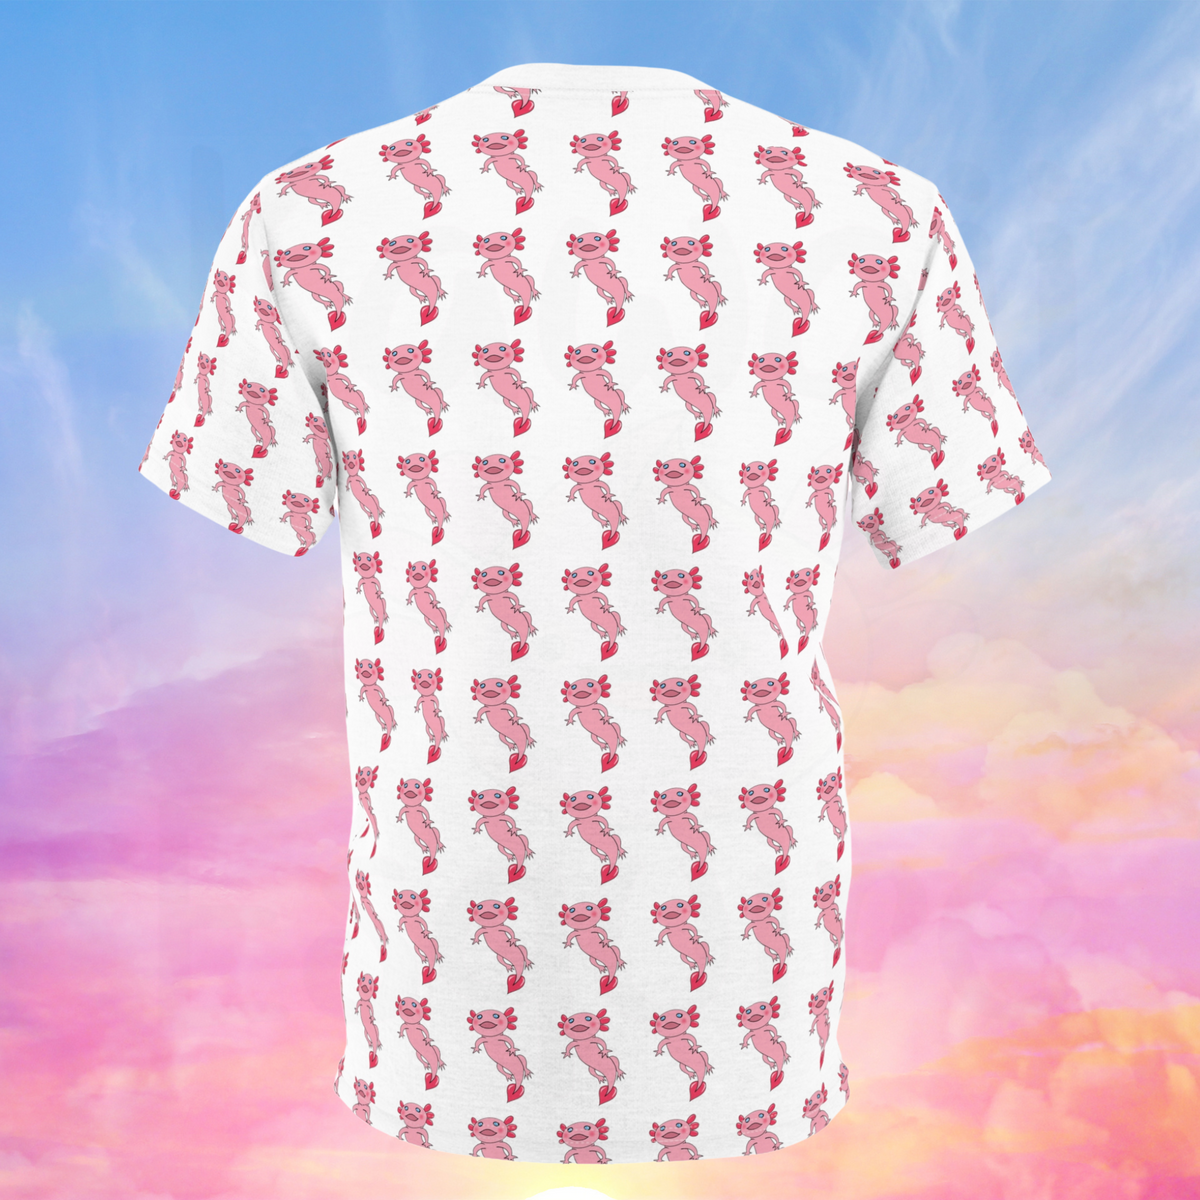 The image displays the back view of an all-over print t-shirt featuring a cute pink axolotl design. The background of the shirt is white with a repeating pattern of smaller pink axolotls throughout. Unlike the front, there is no large axolotl figure; instead, the smaller pink axolotls form a consistent pattern across the entire back of the shirt. 